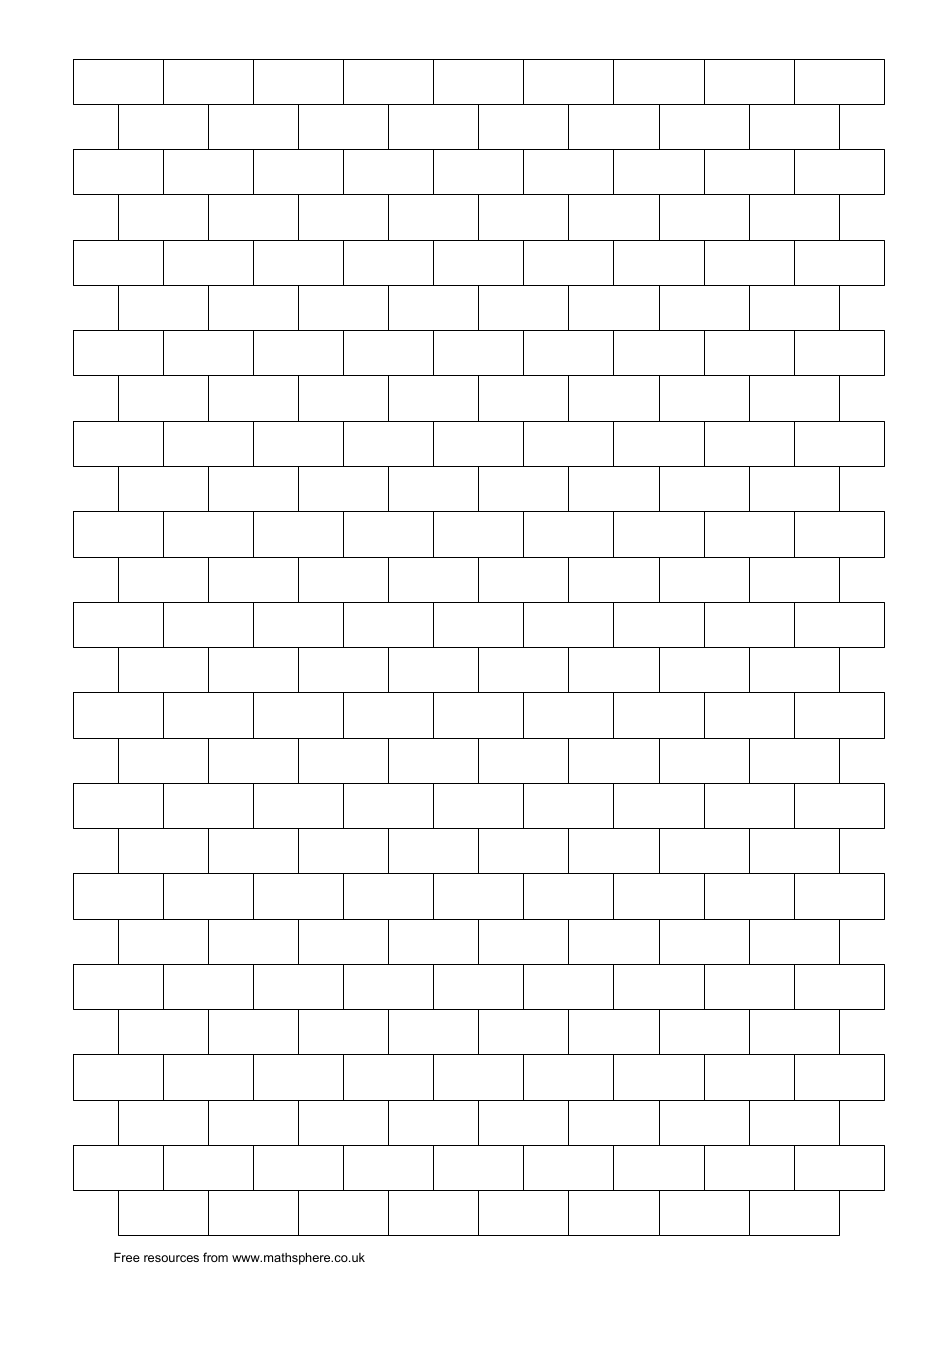 Black Brick Pattern Graph Paper- A visually appealing black brick pattern adds a touch of style and sophistication to this graph paper template.